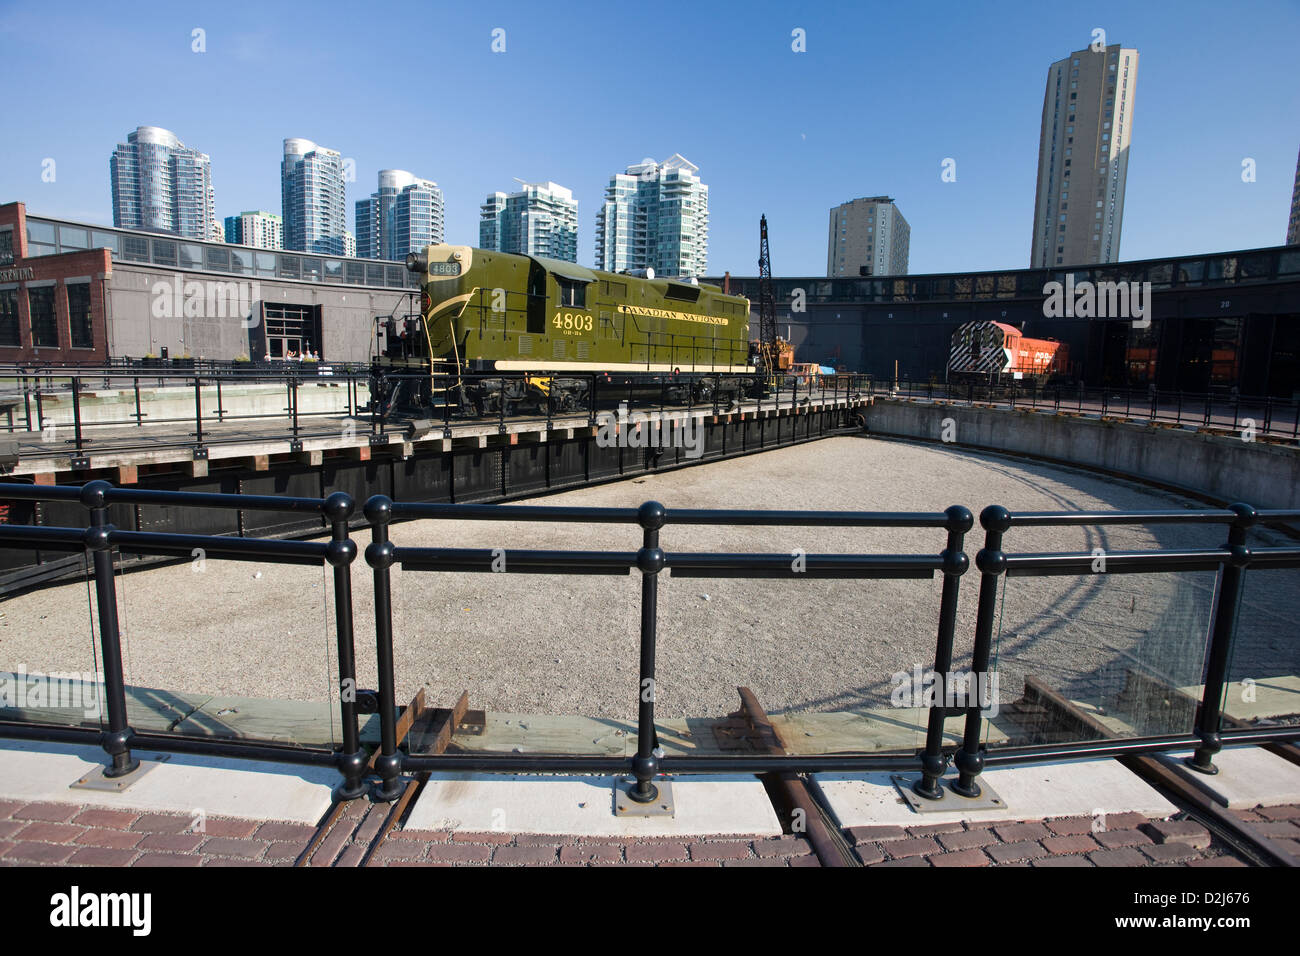 A Canadian National Railway locomotive 4803 and turntable in the city centre, Toronto, Canada Stock Photo